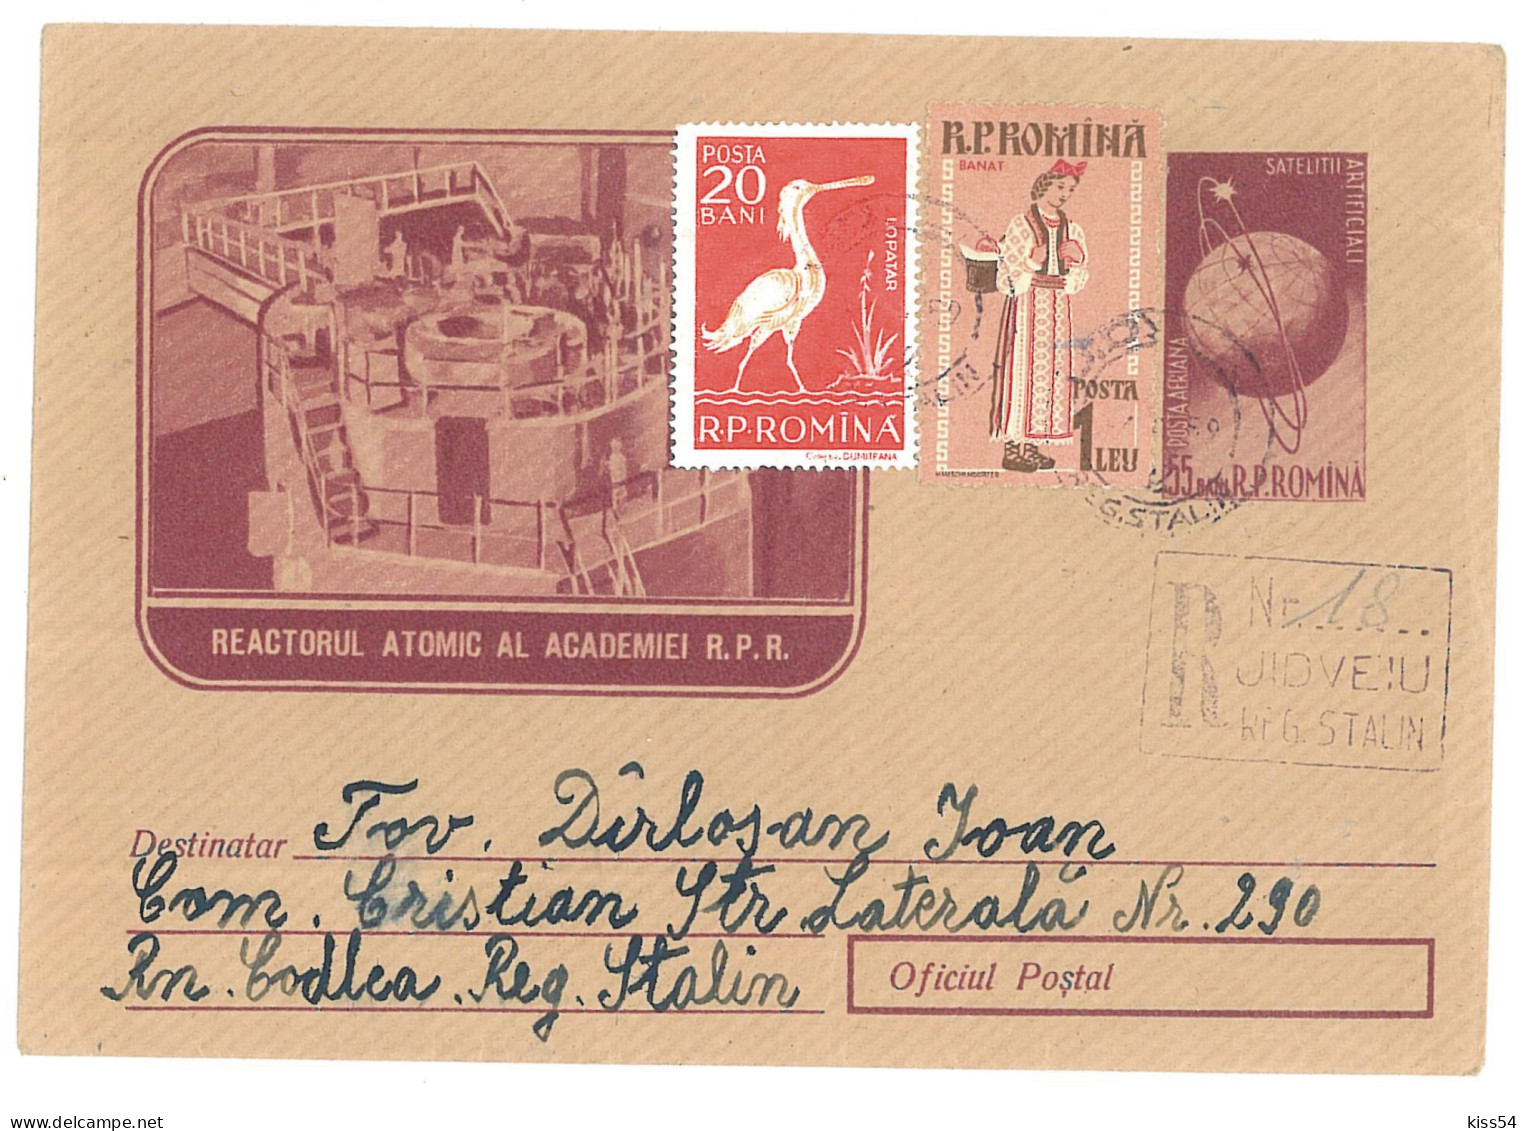 IP 58 A - 0119d-b ENERGY, Atomic Reactor, Romania - REGISTERED Stationery - Used - 1958 - Atoom